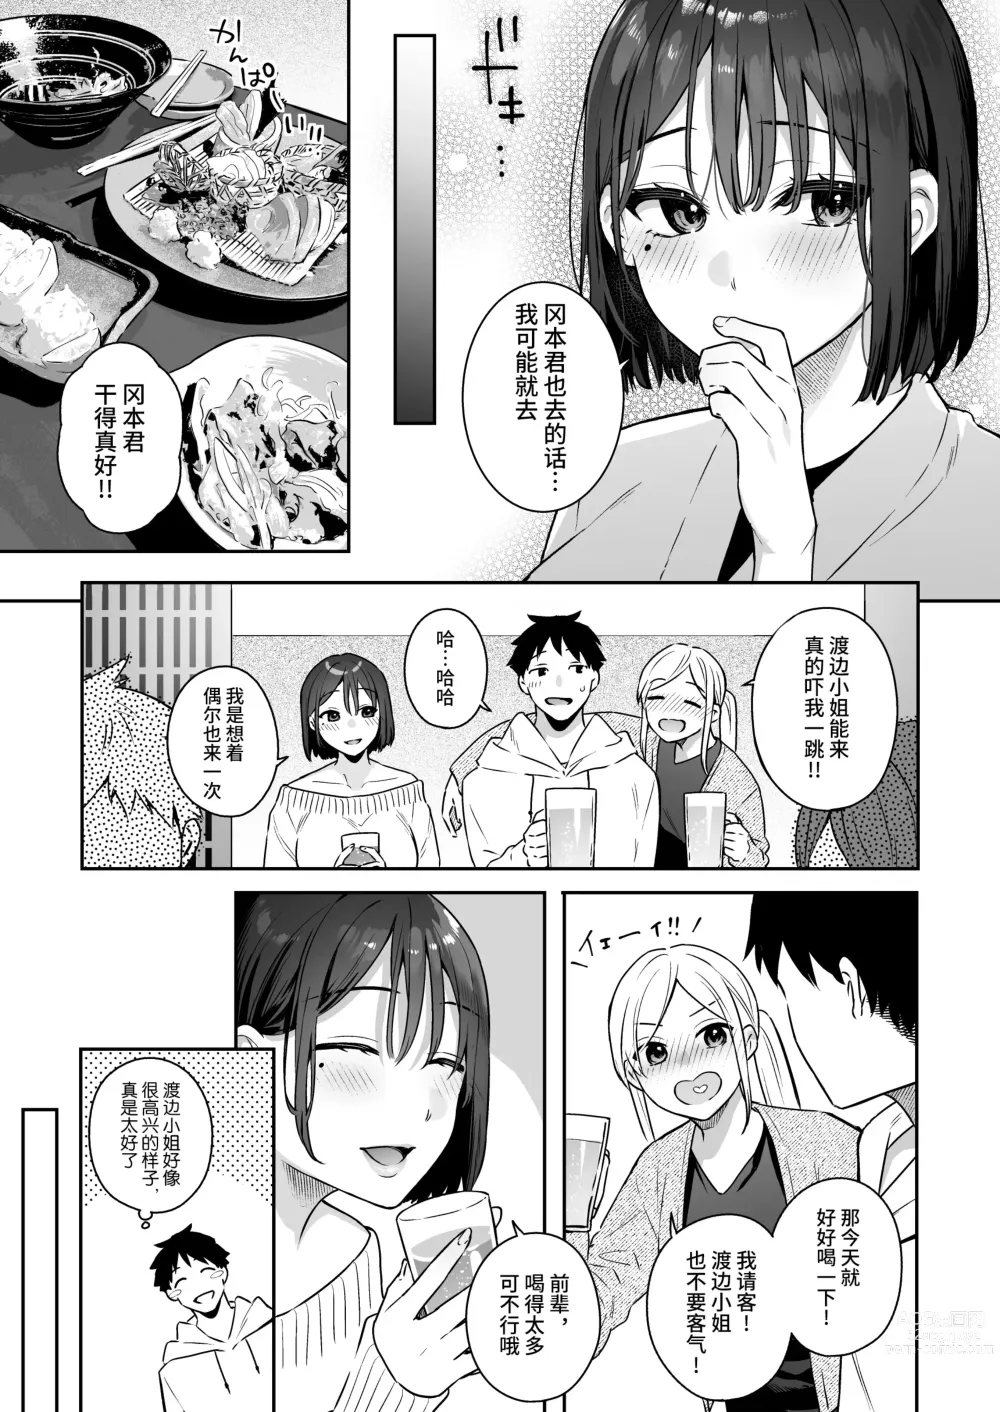 Page 9 of doujinshi 她的发情开关